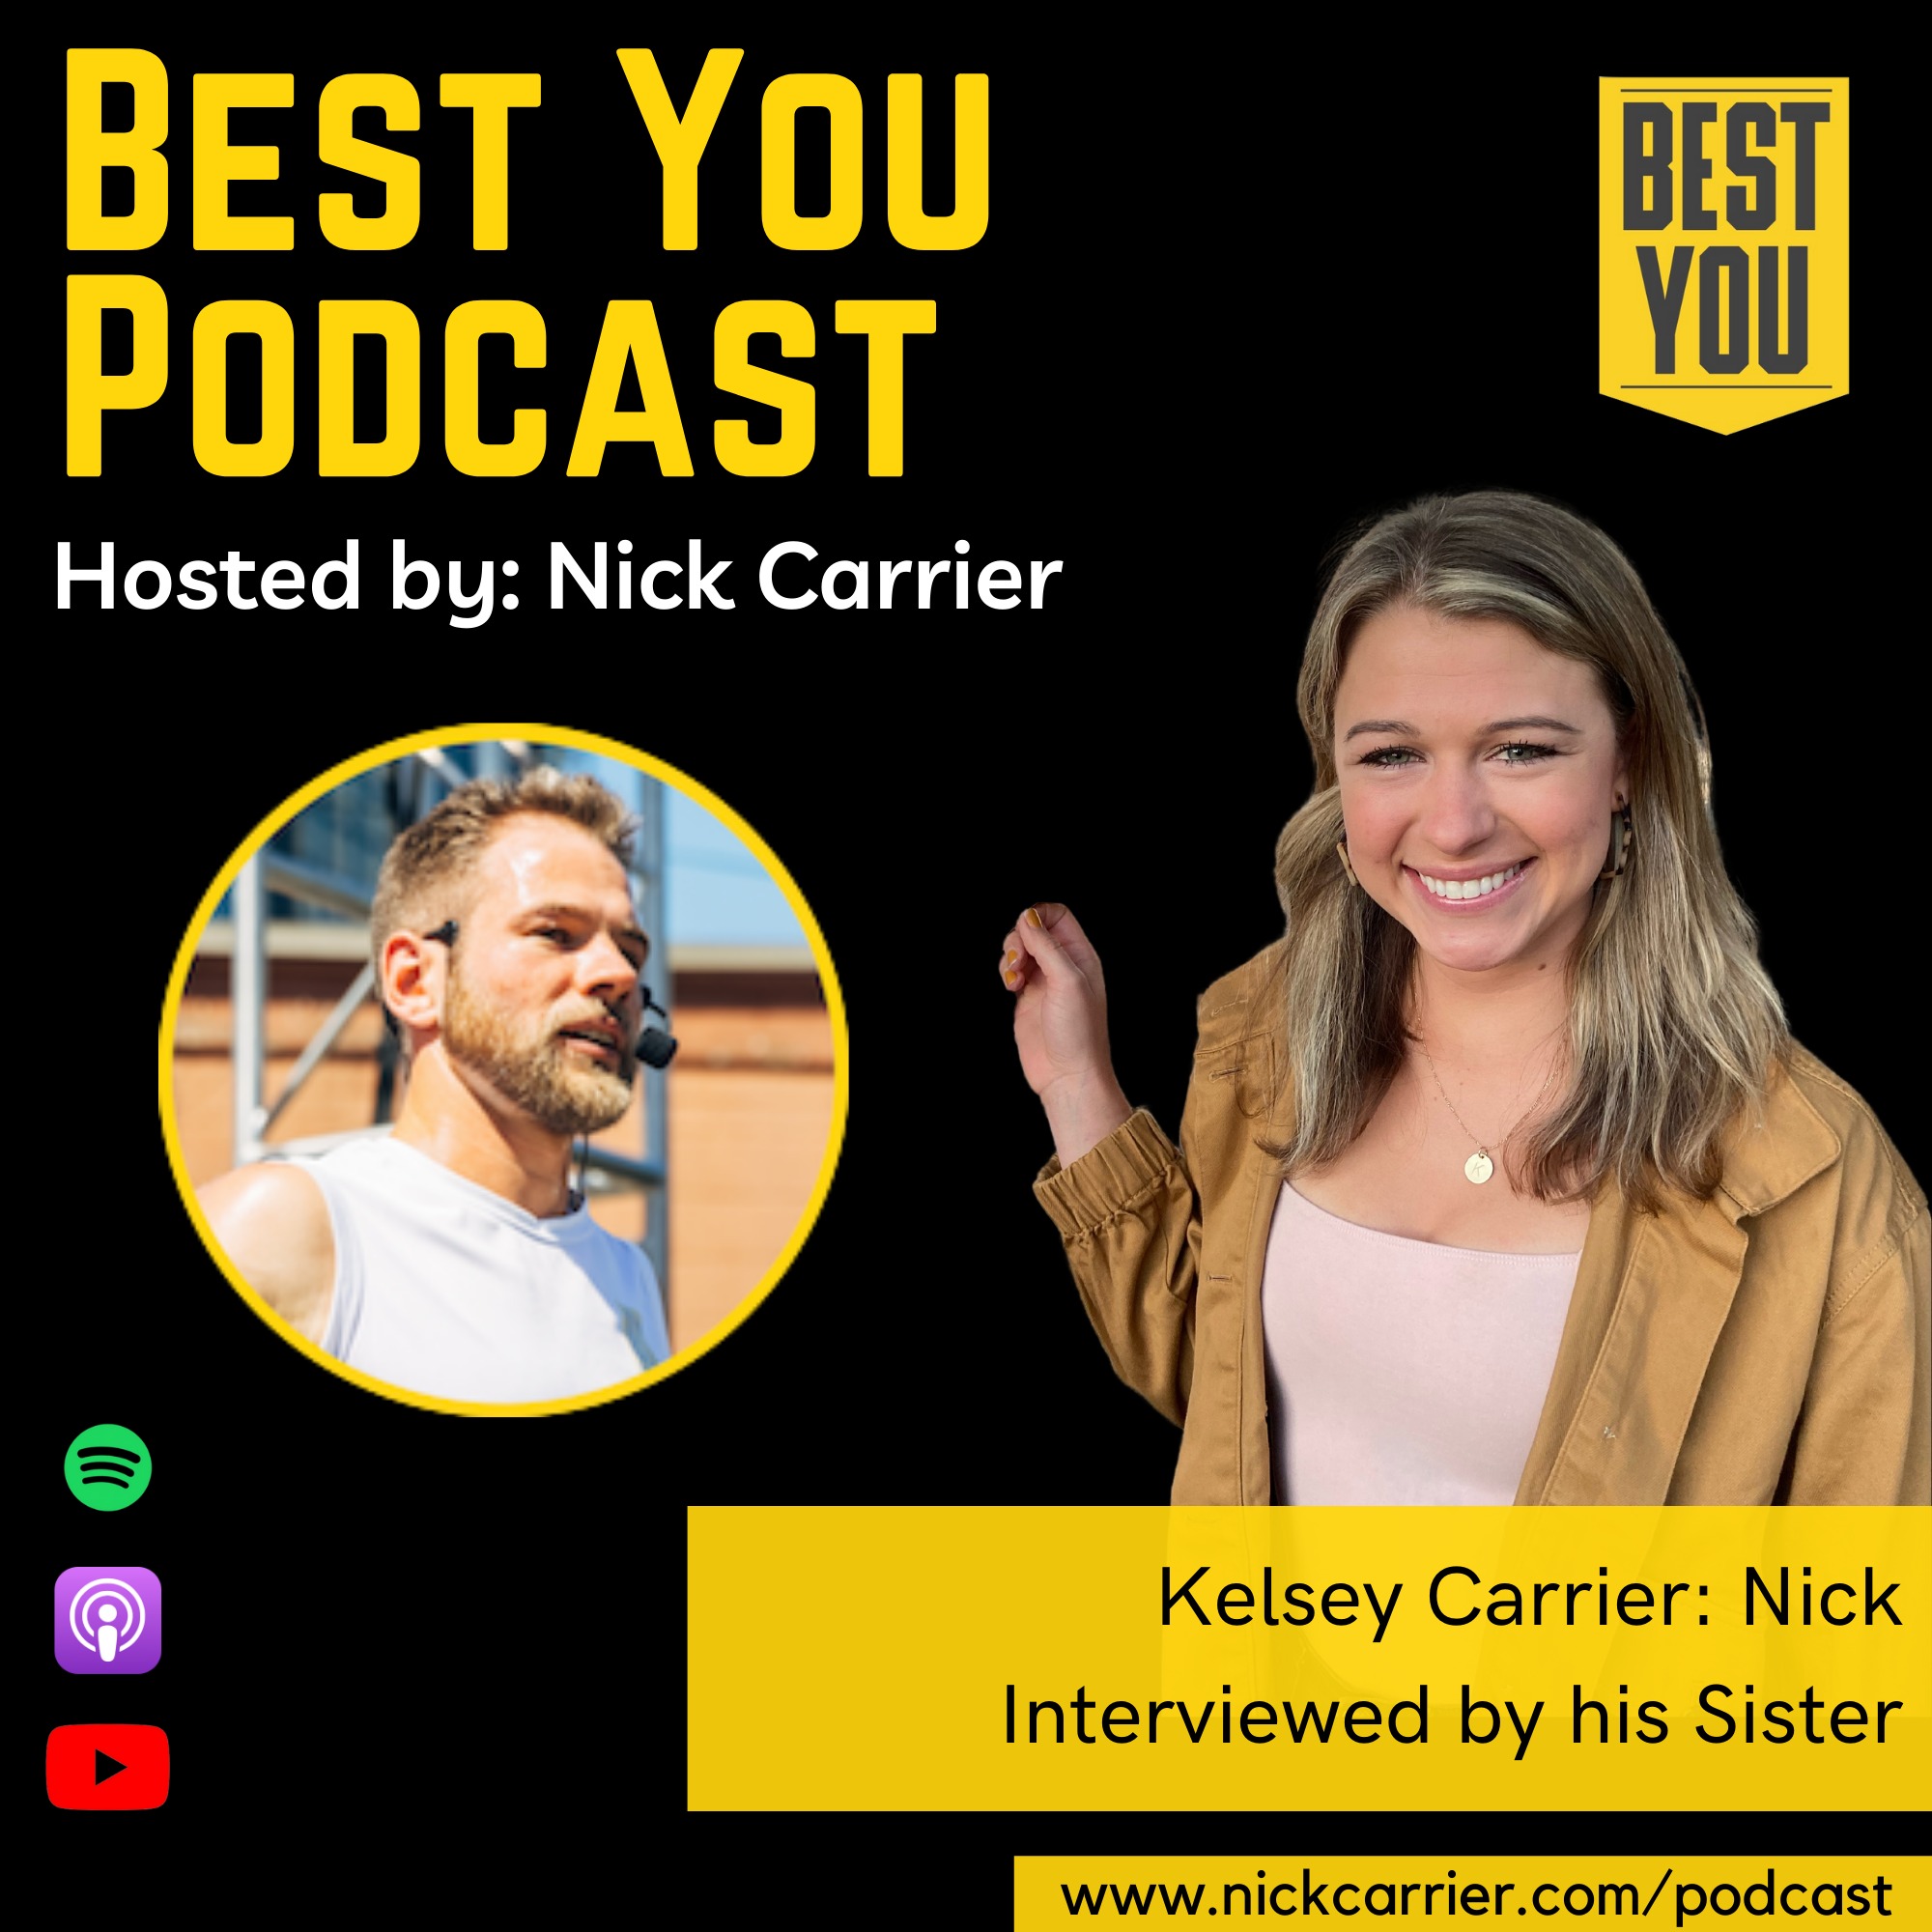 Kelsey Carrier - Interviewing Nick (Part 2)